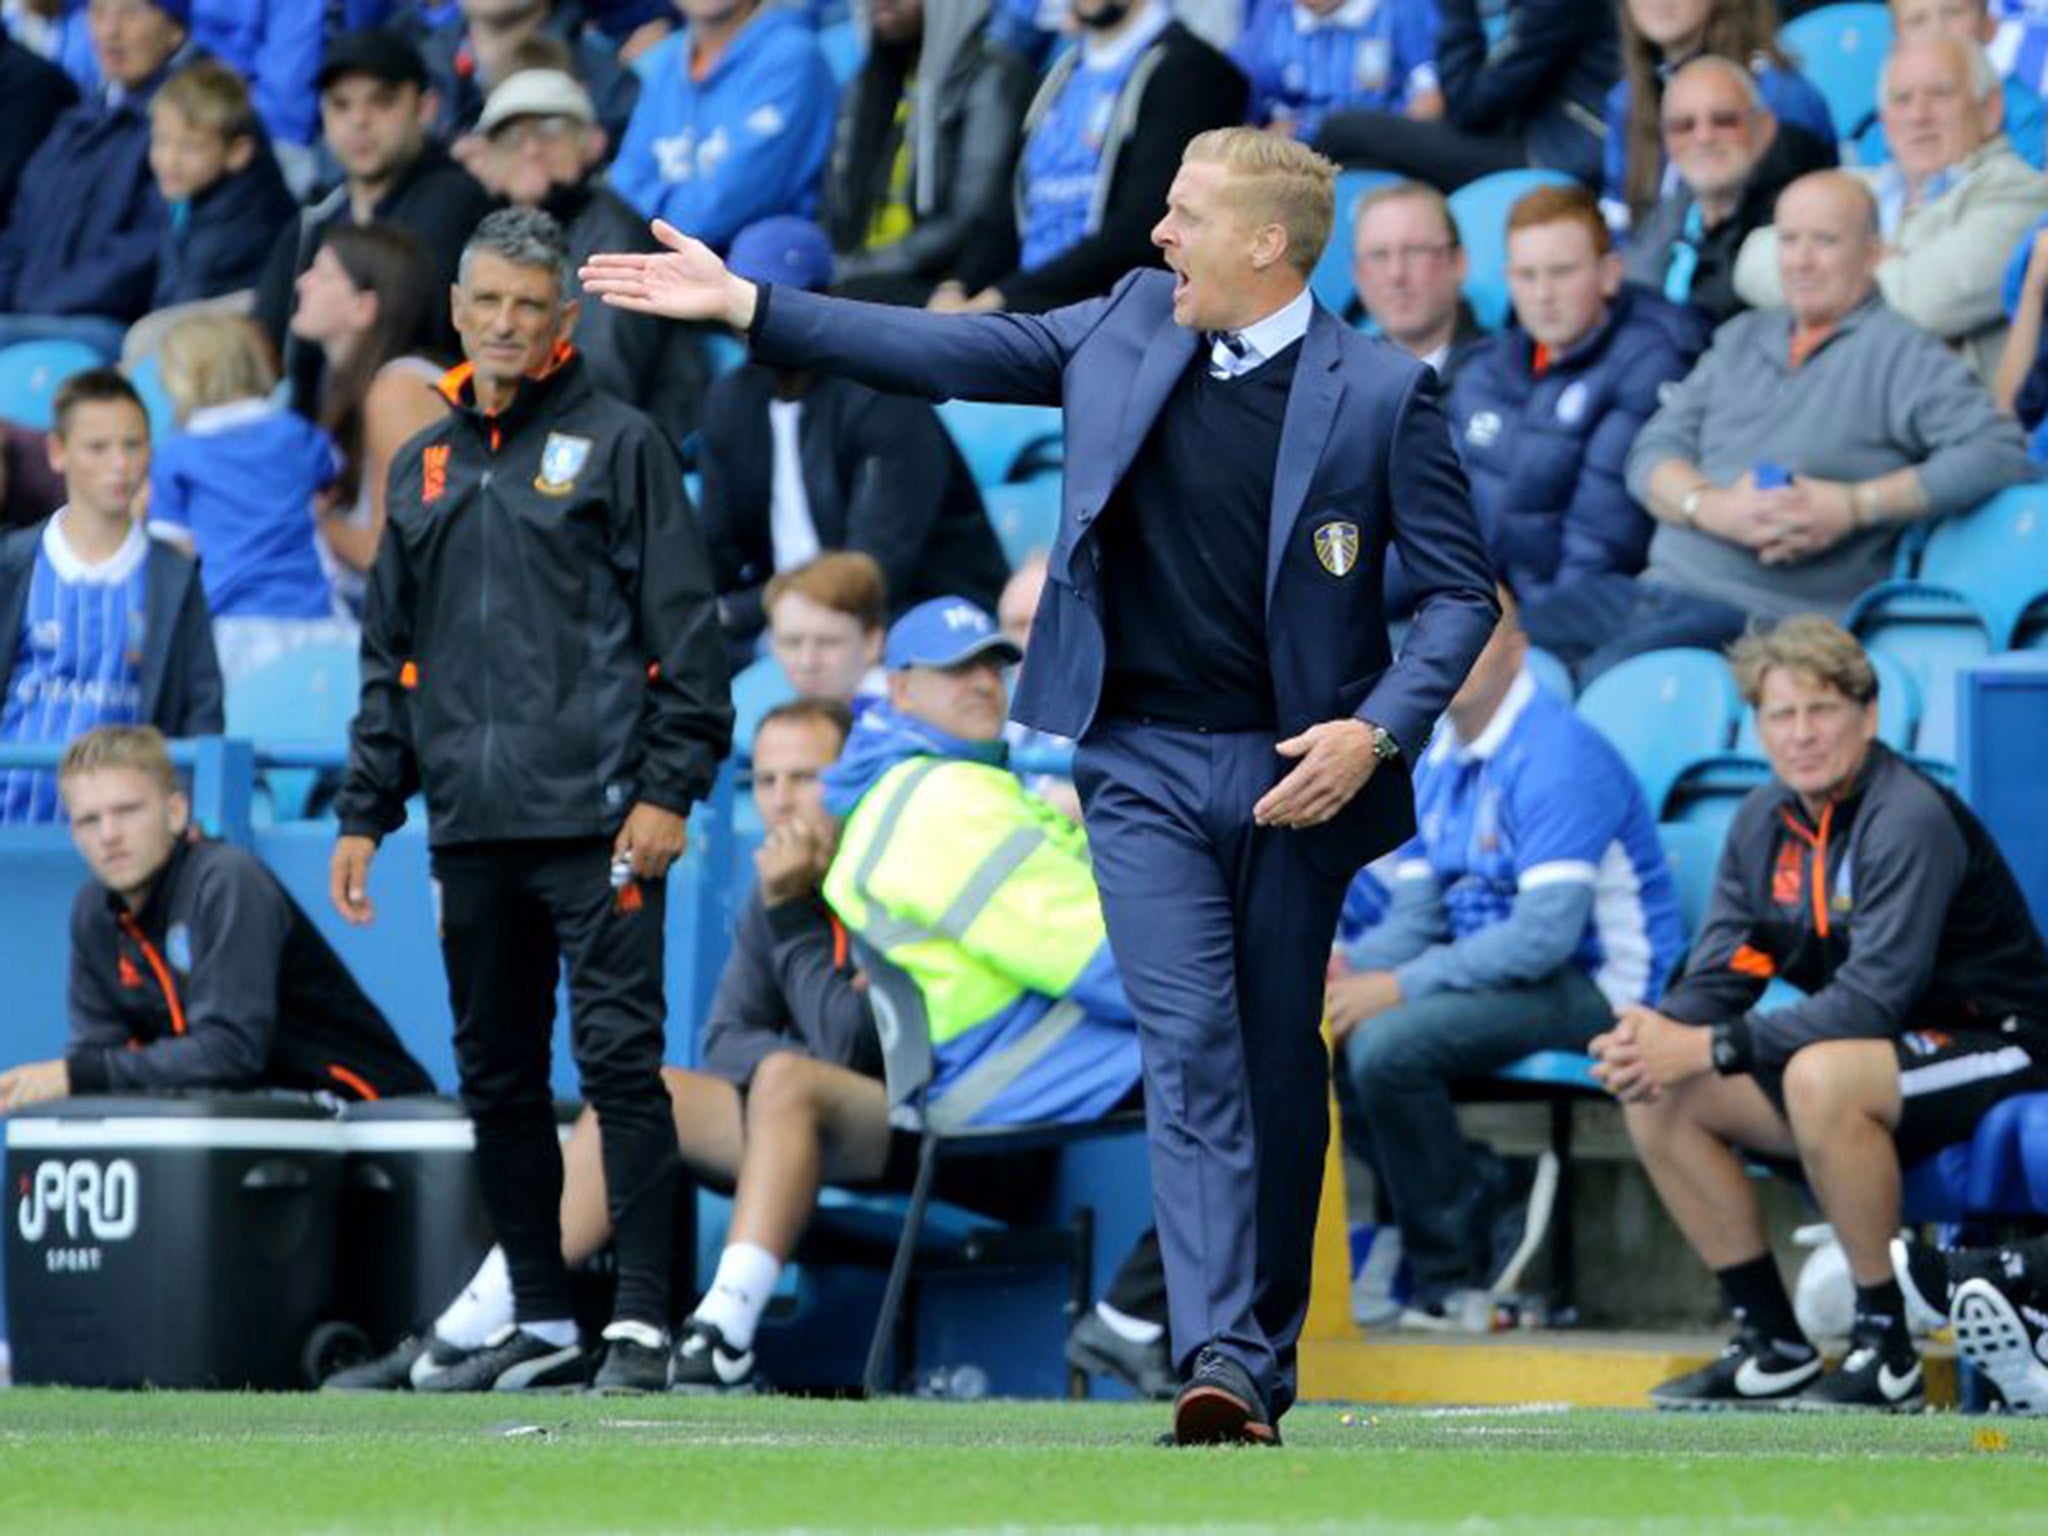 Monk gestures during Leeds United's 2-0 victory over Sheffield Wednesday